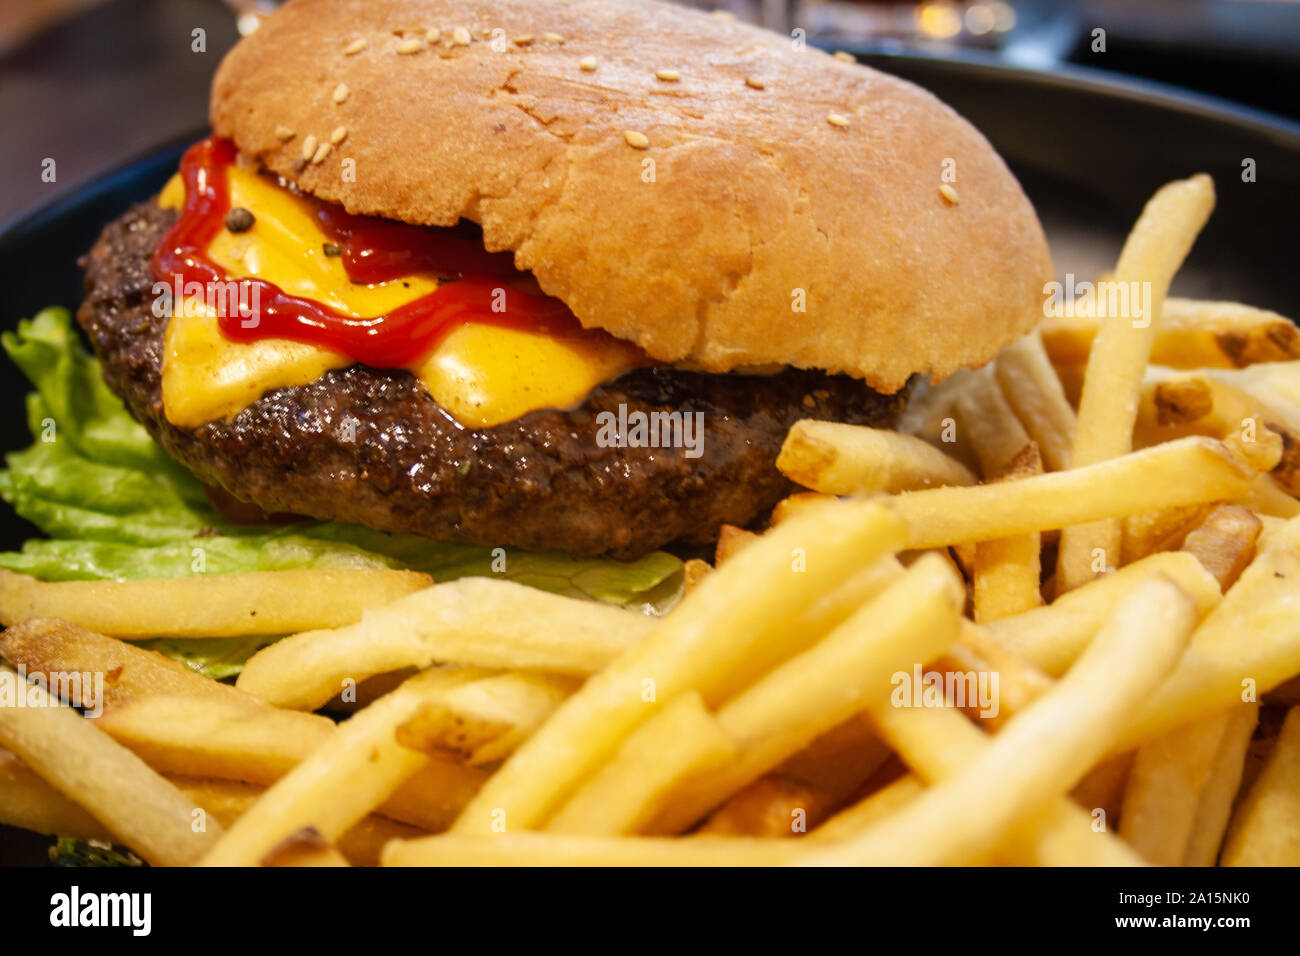 Burger, hamburger with beef, french fries, ketchup, cheese and lettuce ...